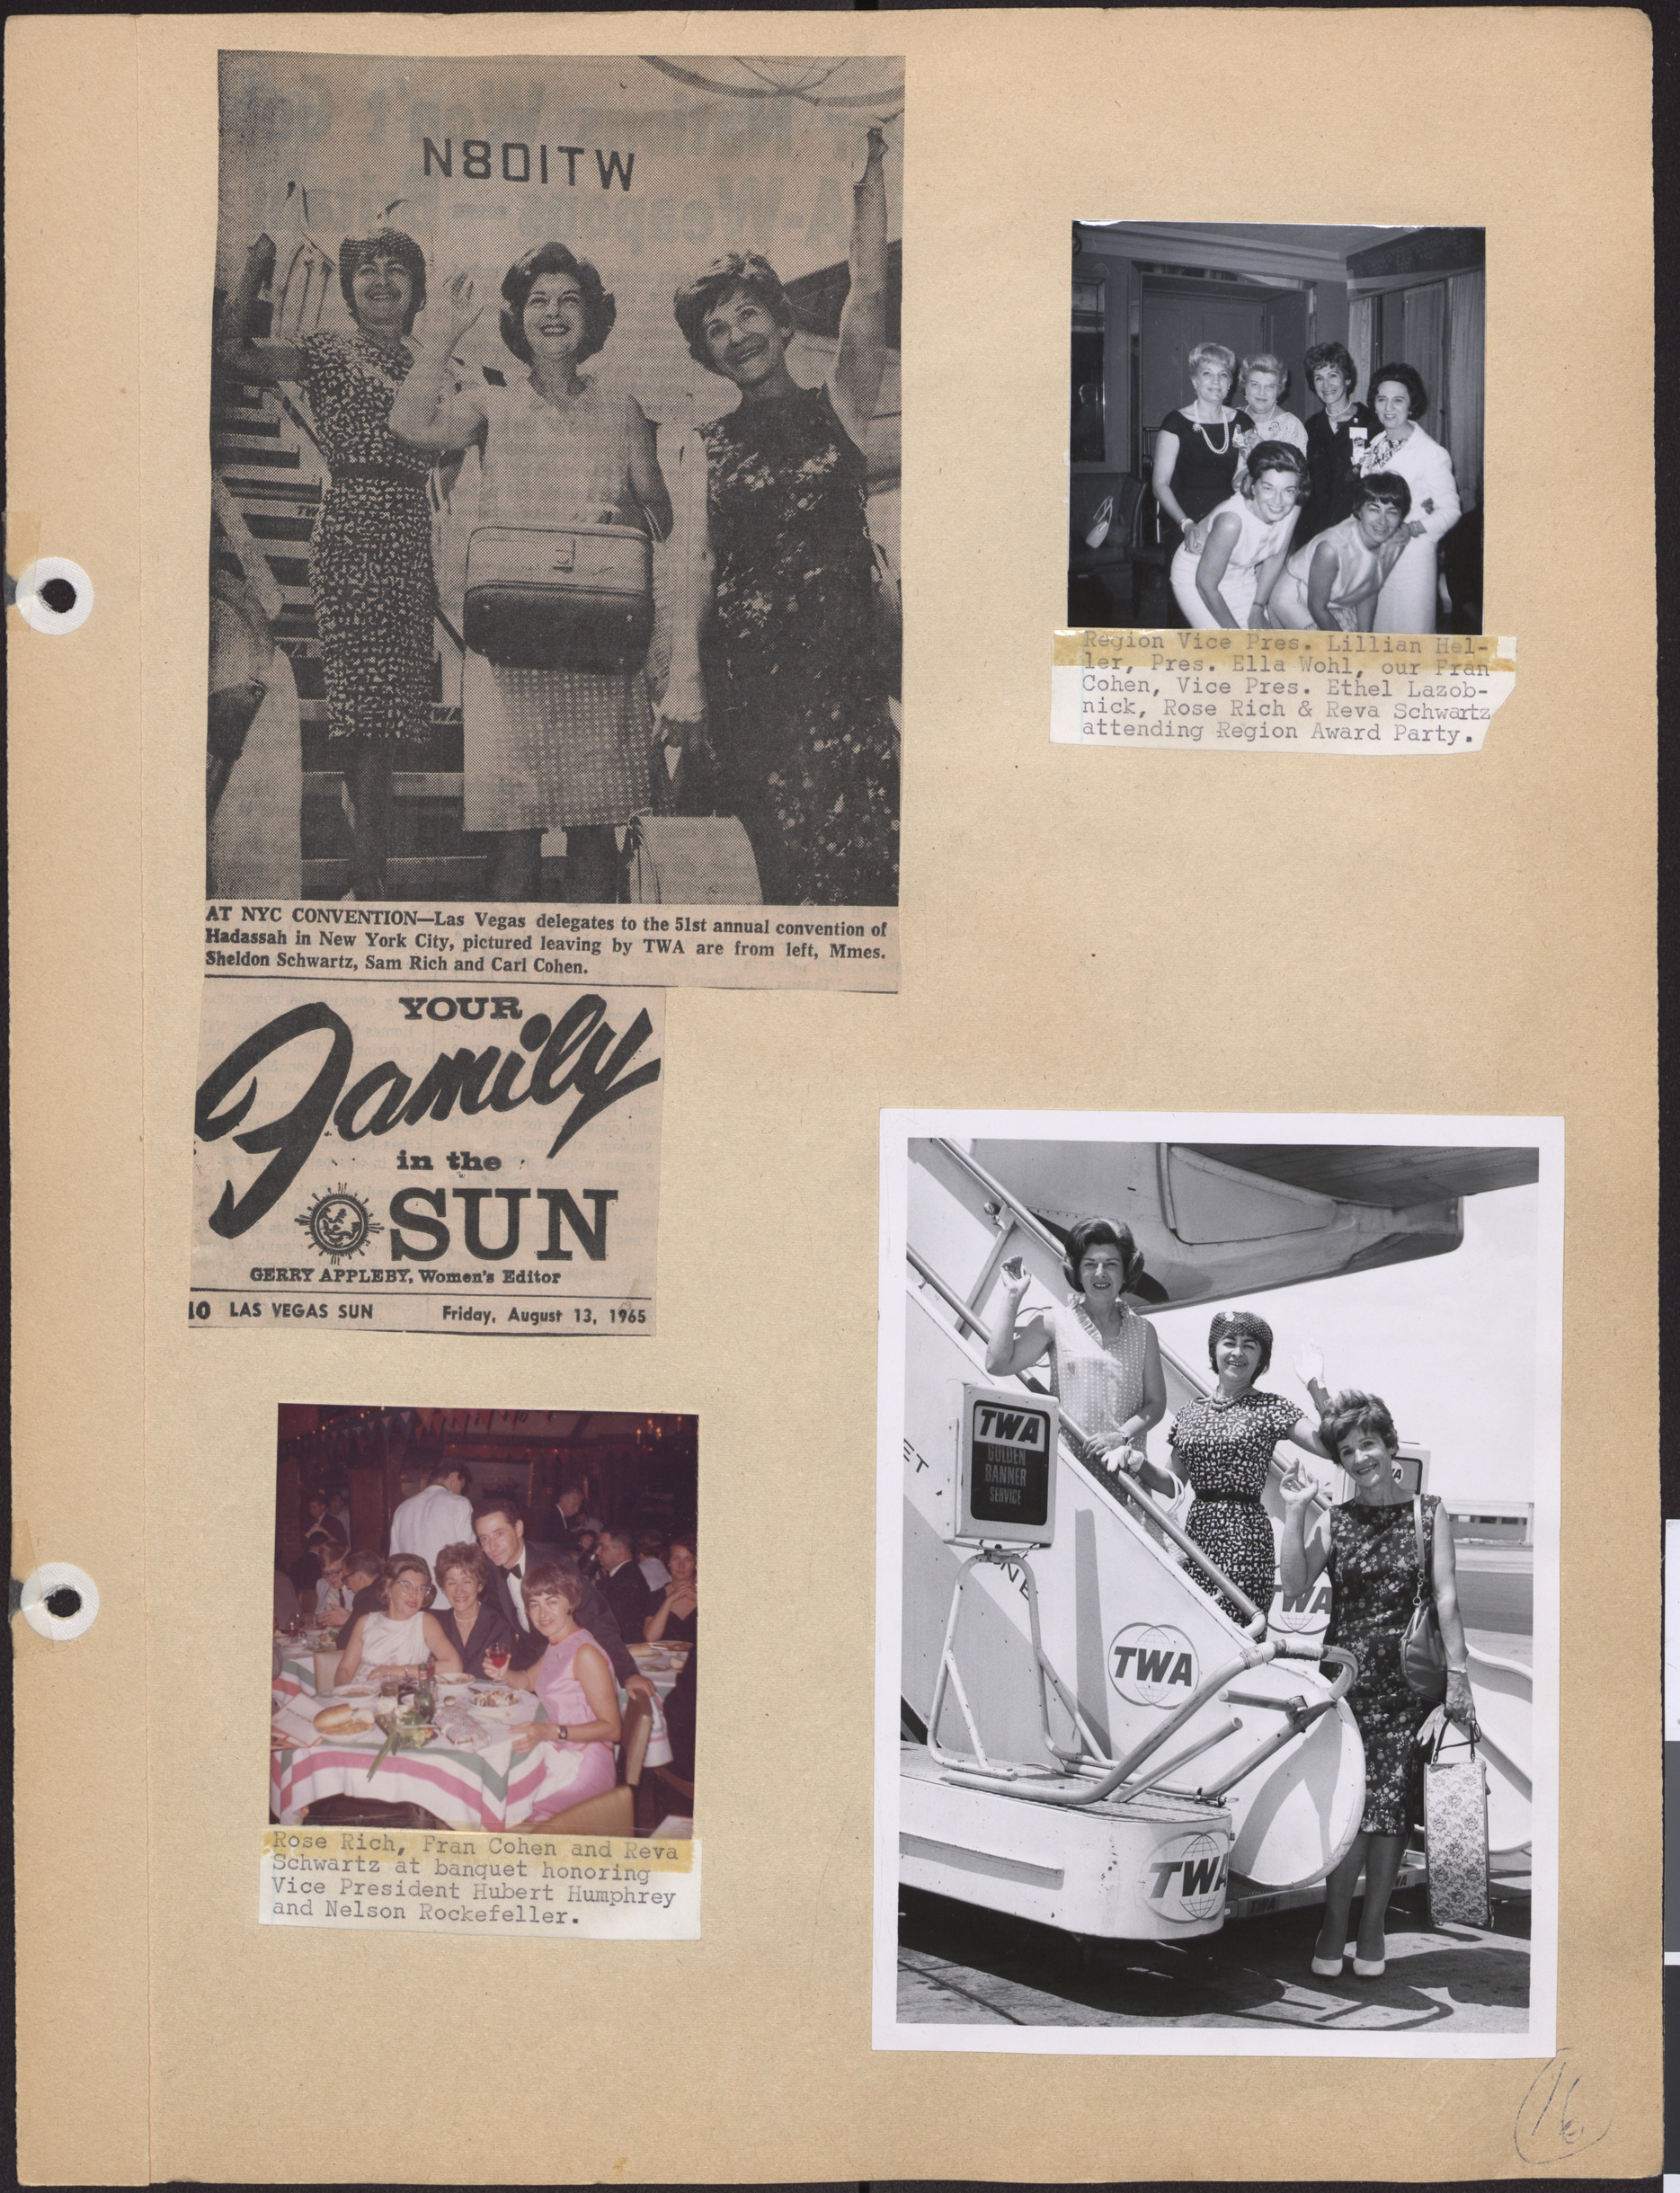 Newspaper clippings and photographs about the National Hadassah Convention held in New York City, 1965